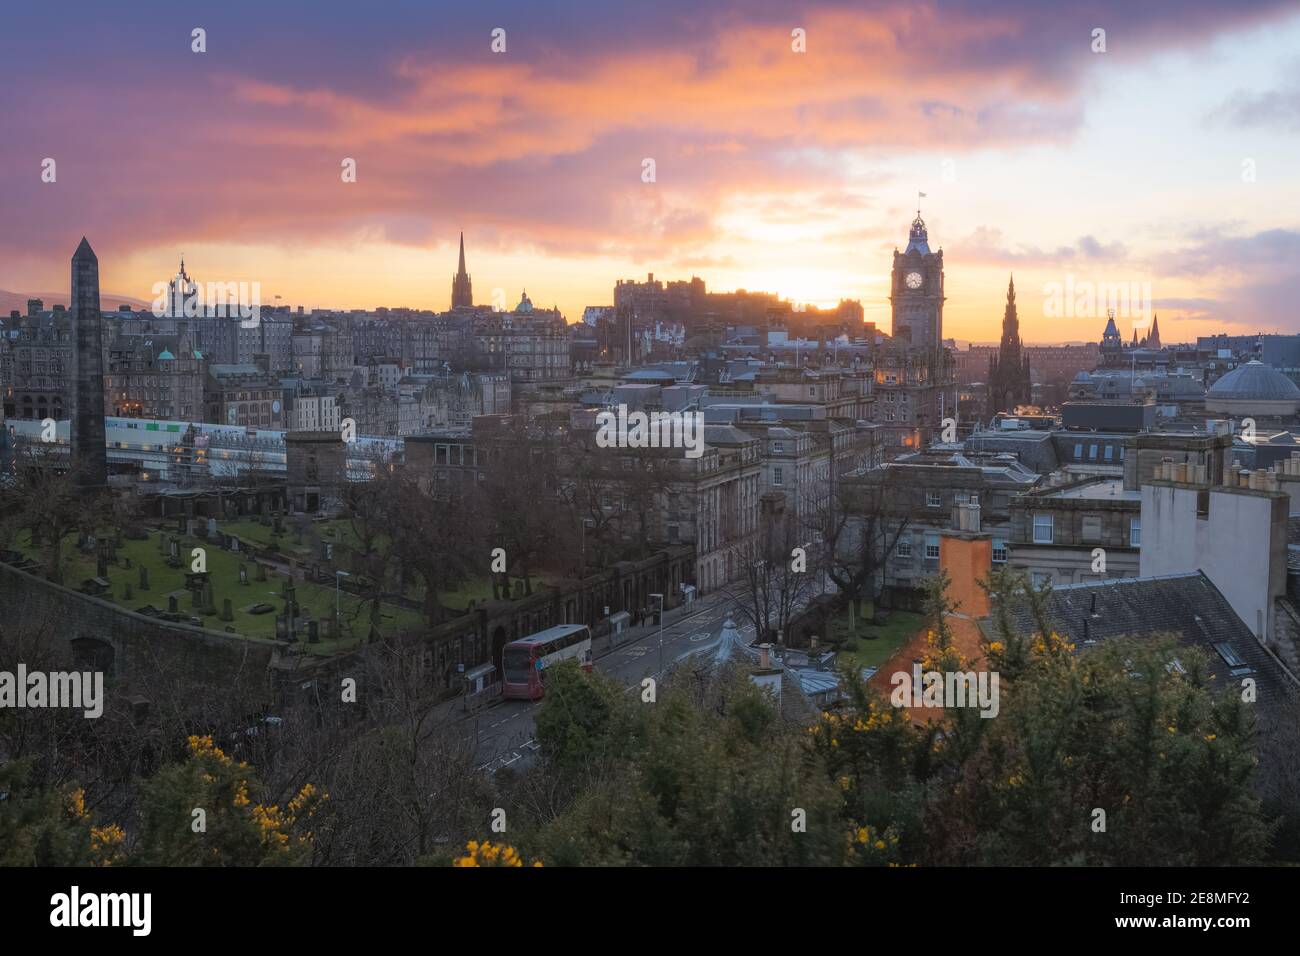 Cityscape view of Edinburgh old town skyline, Princes Street, Balmoral Clock Tower and Edinburgh Castle from Calton Hill with a dramatic sunset in the Stock Photo